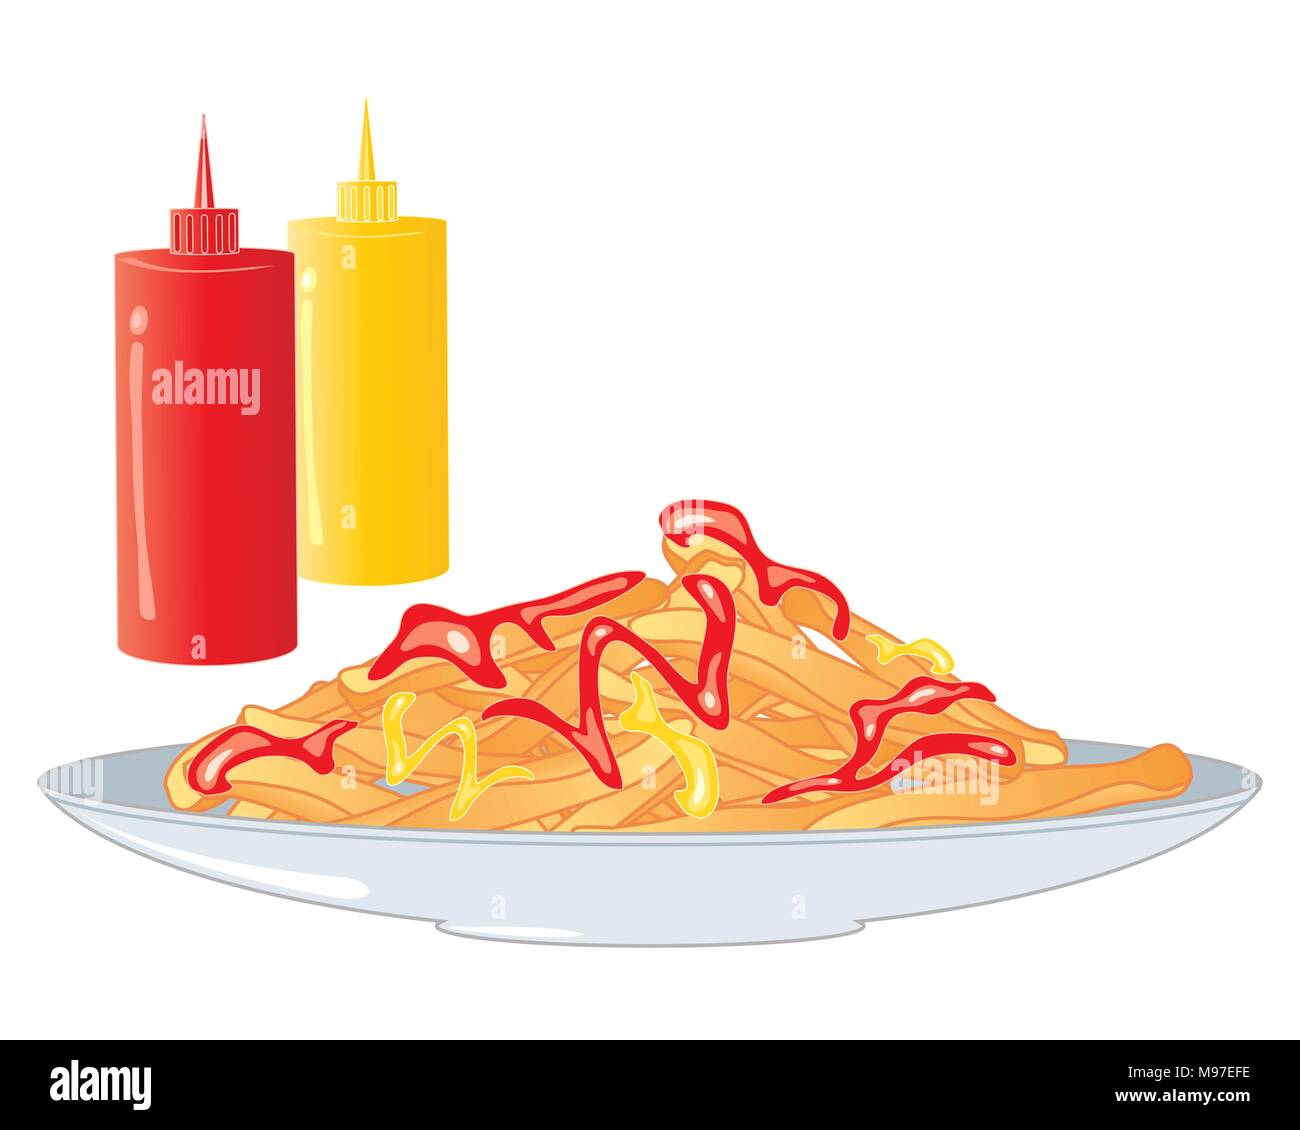 a vector illustration in eps 10 format of a plate of crispy golden chips with ketchup and mustard accompaniment on a gray plate with sauce bottles Stock Vector